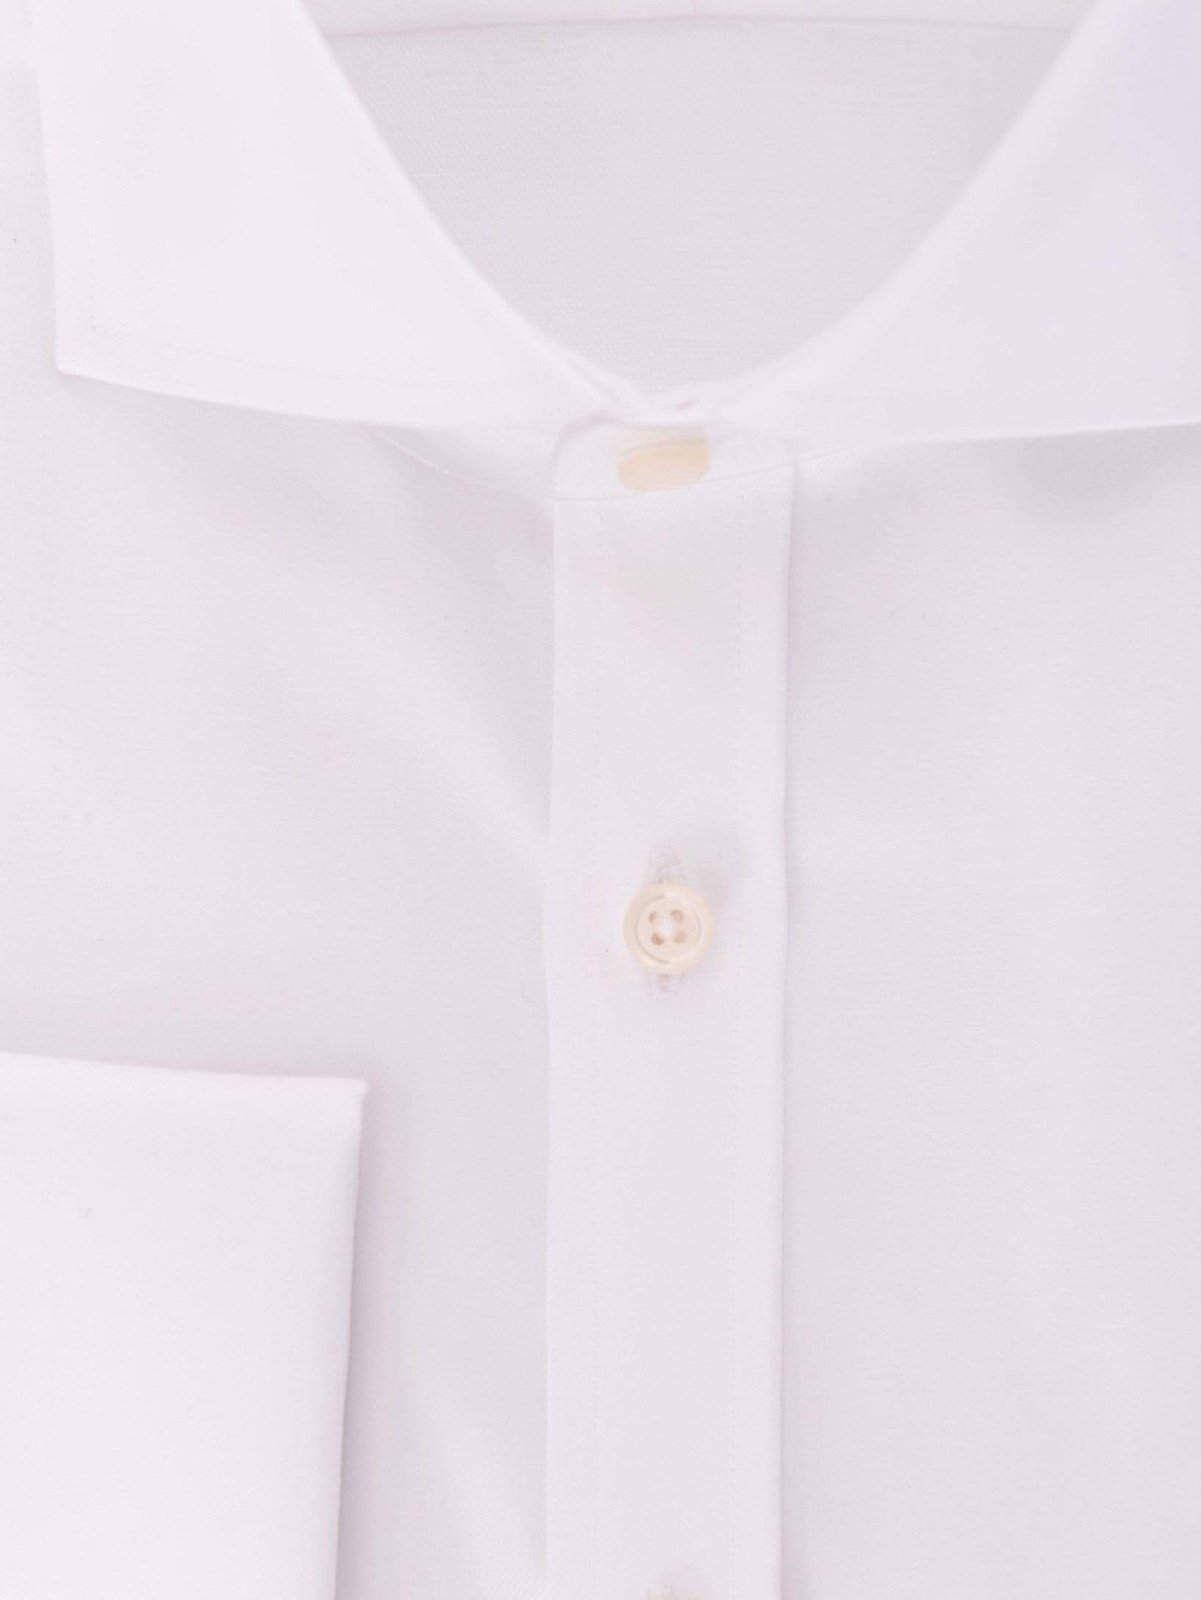 Christopher Morris Bestselling Items Christopher Morris Men's 100% Cotton Non-Iron White French Cuff Dress Shirt